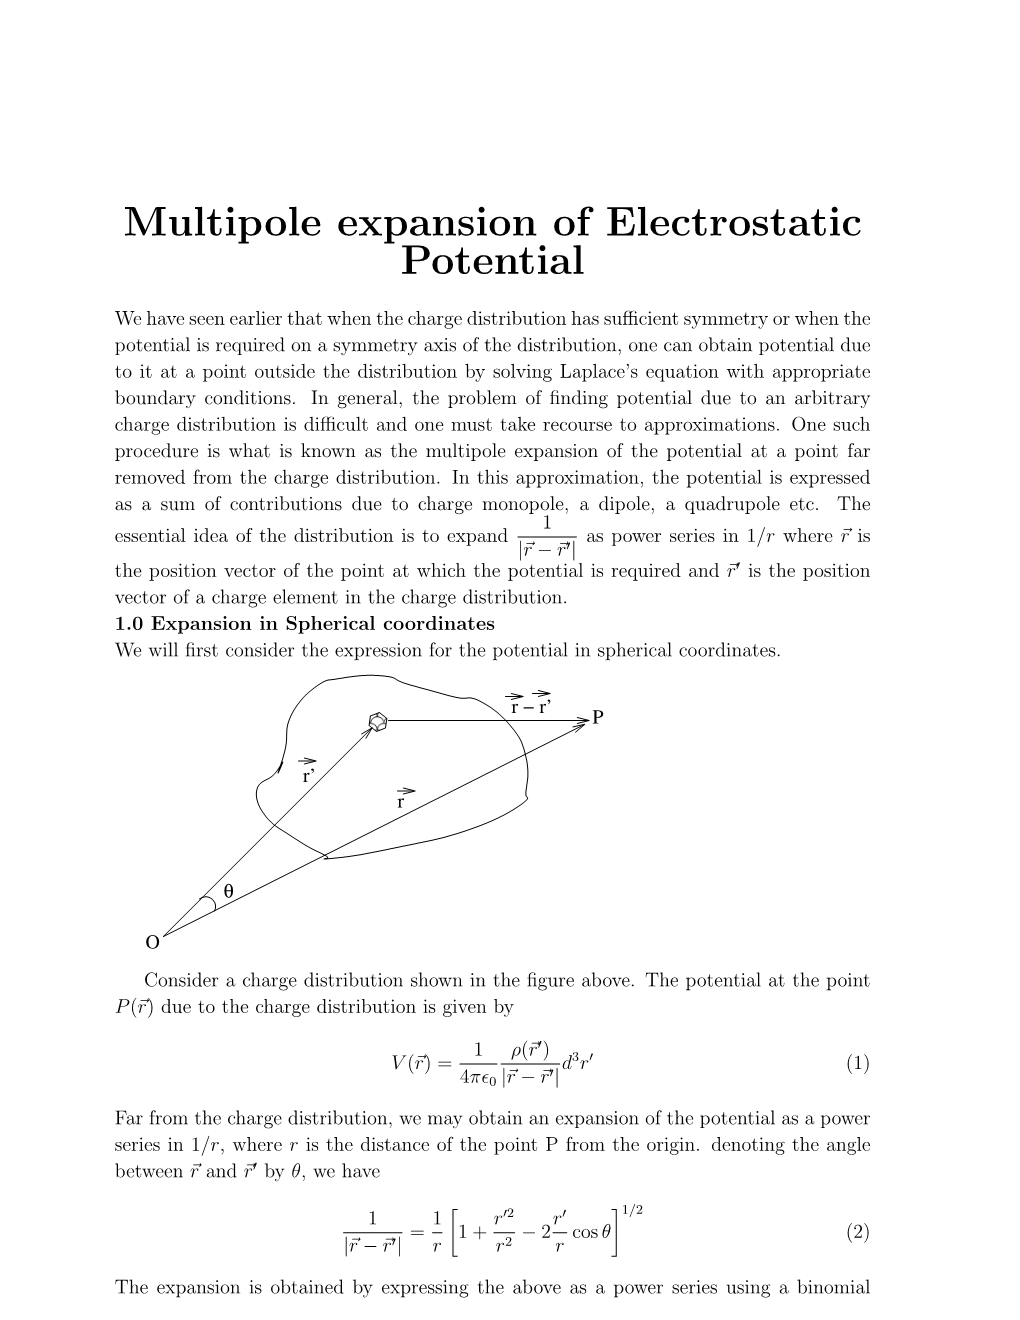 Multipole Expansion of Electrostatic Potential